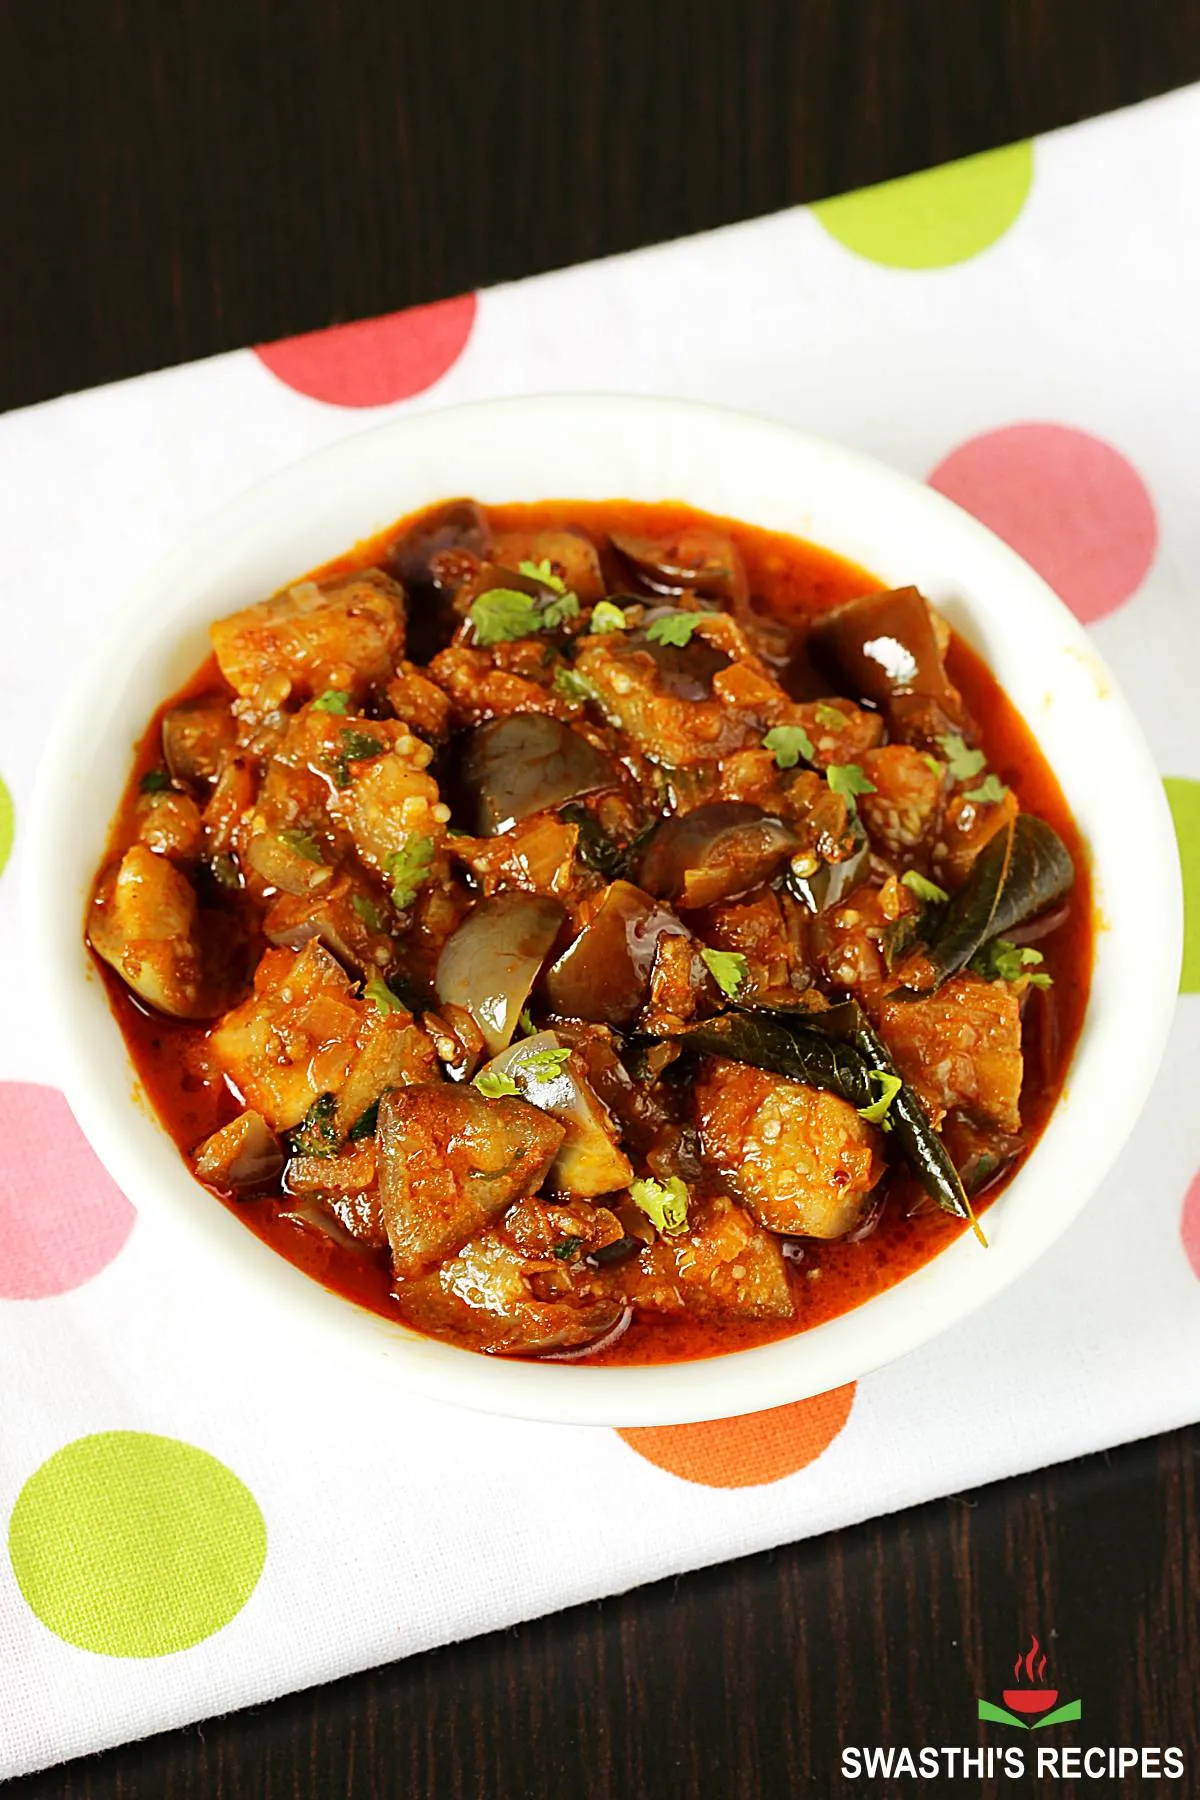 Brinjal Curry is Indian Eggplant curry